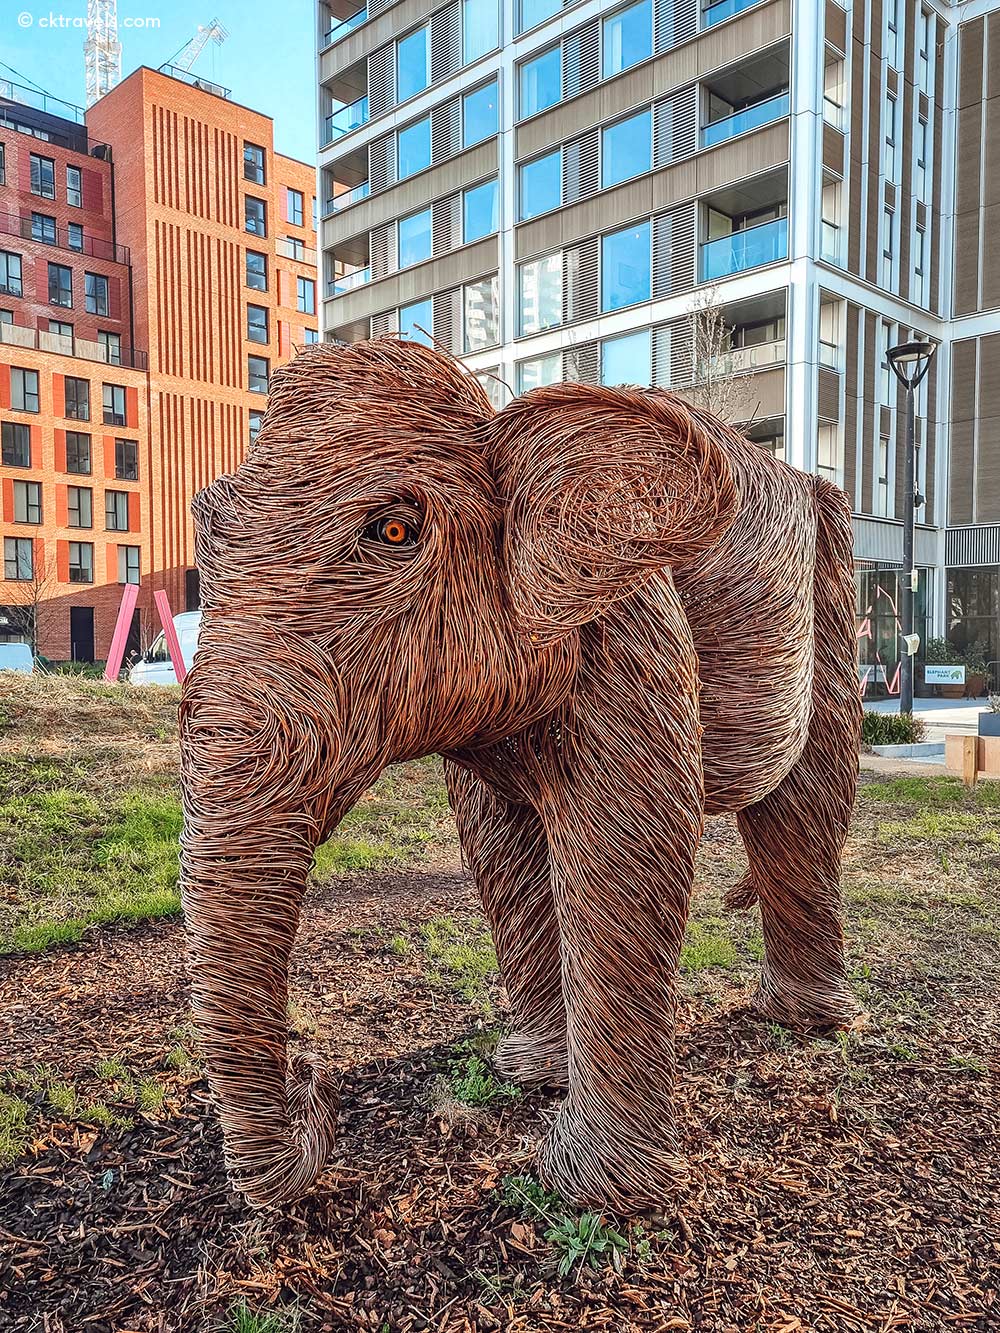 22 Things to do in Elephant and Castle, London (2023) - CK Travels